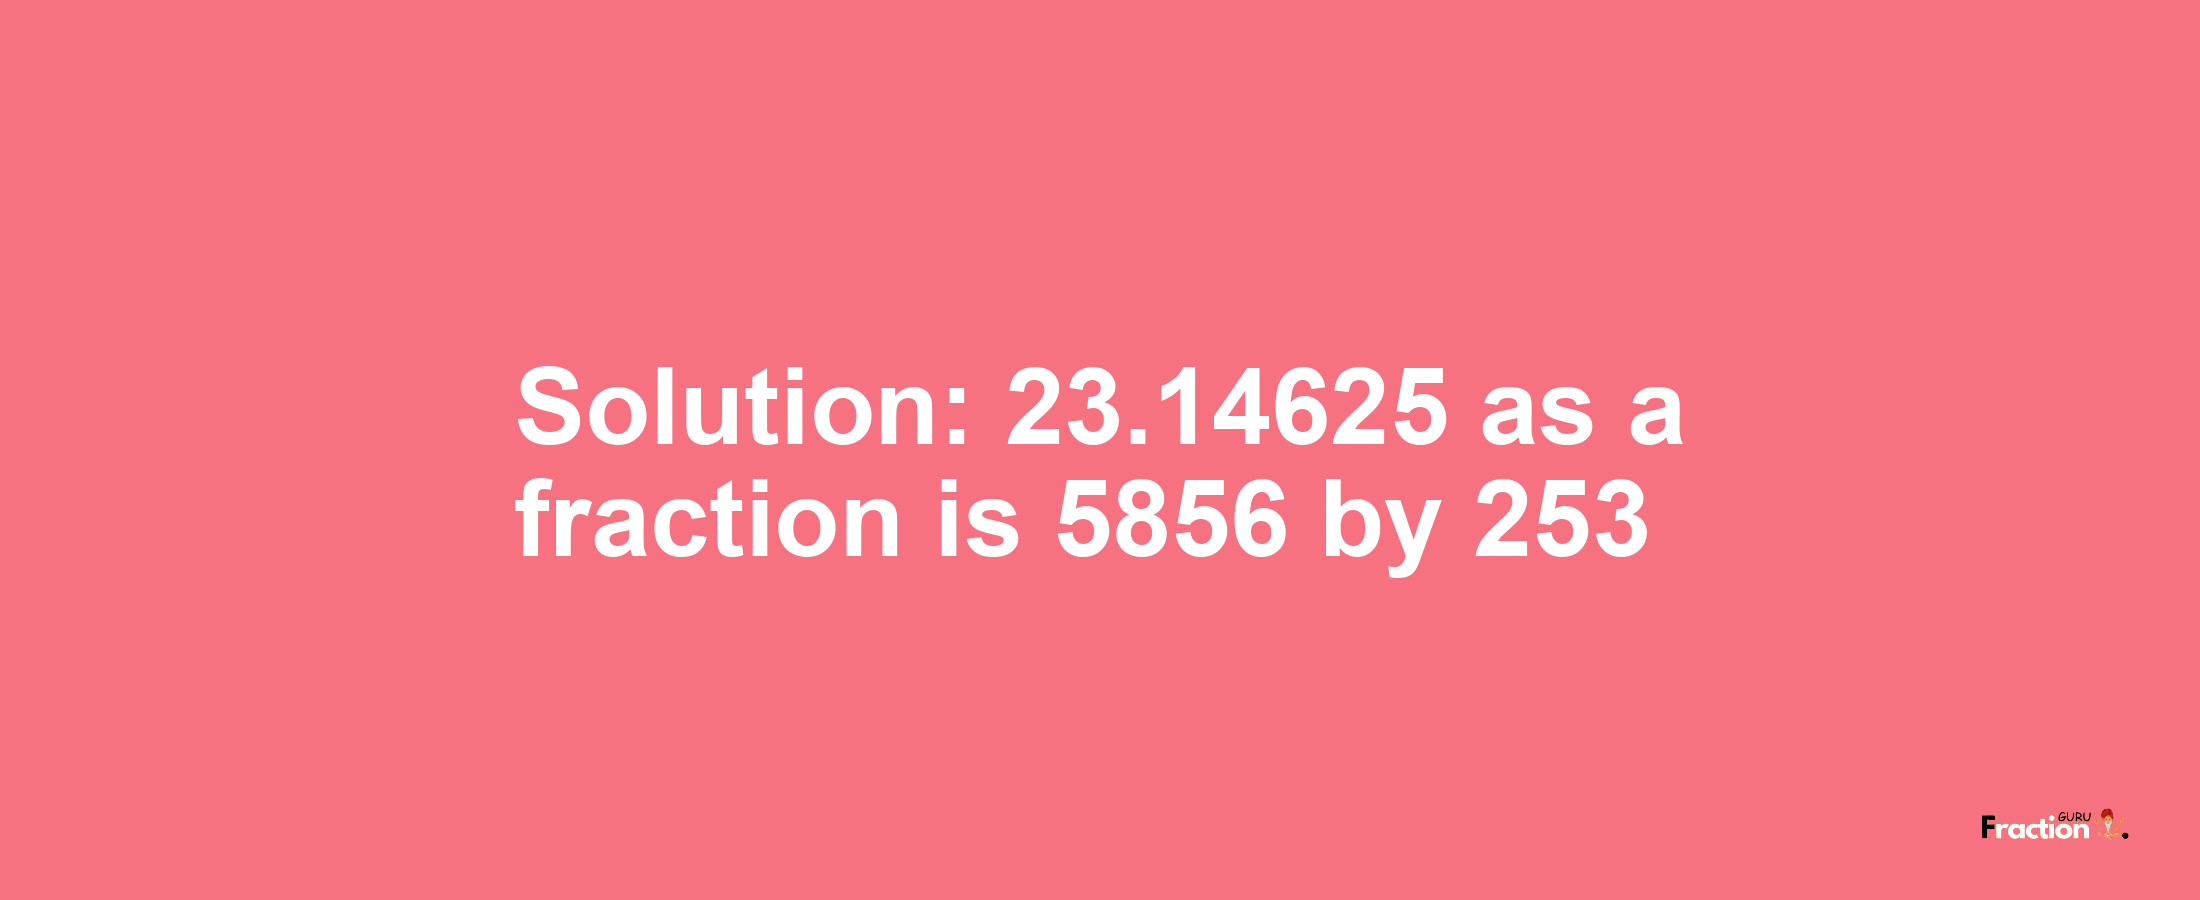 Solution:23.14625 as a fraction is 5856/253